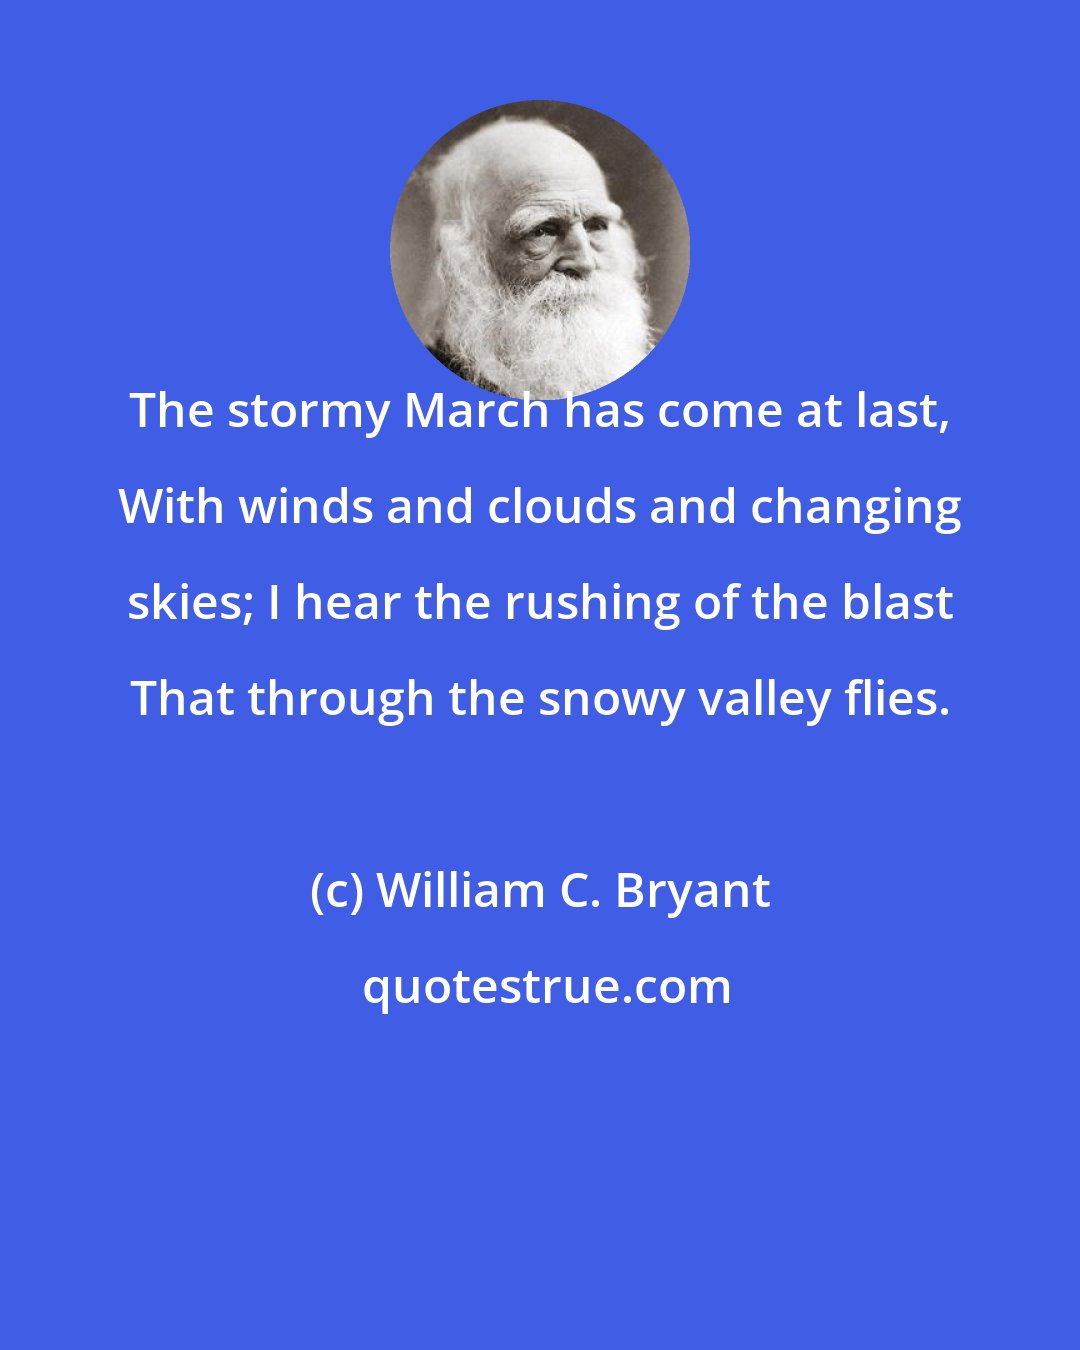 William C. Bryant: The stormy March has come at last, With winds and clouds and changing skies; I hear the rushing of the blast That through the snowy valley flies.